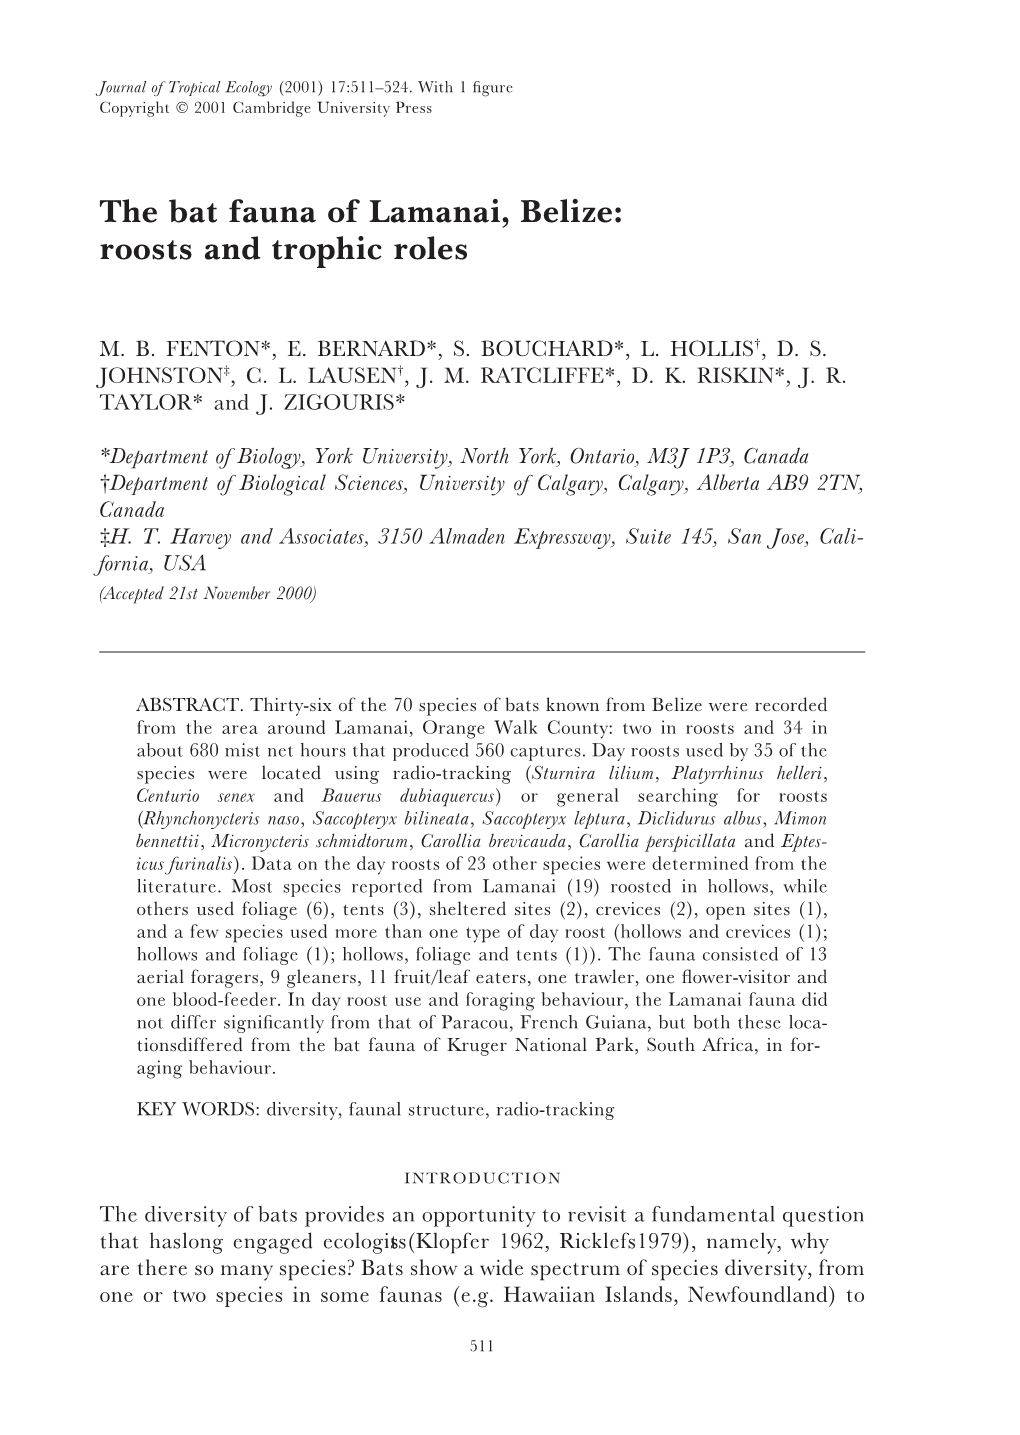 The Bat Fauna of Lamanai, Belize: Roosts and Trophic Roles